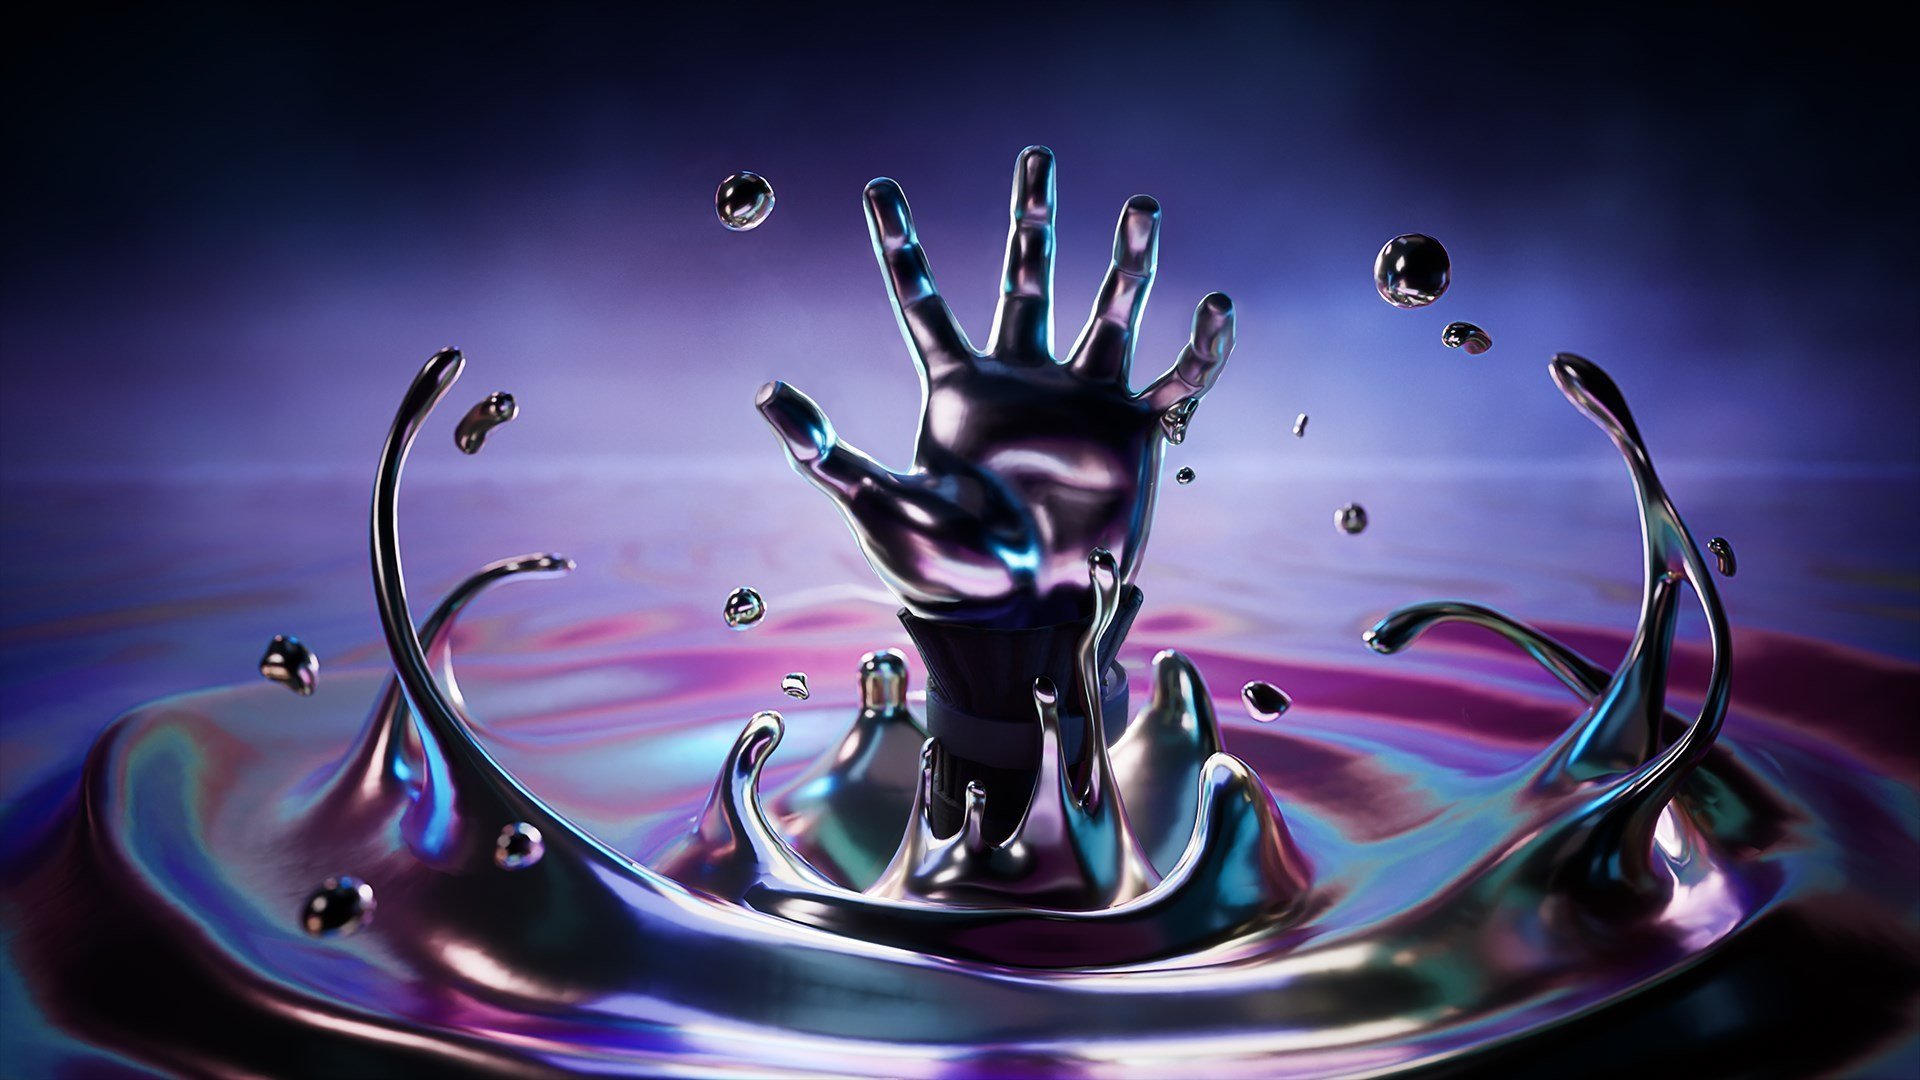 A promotional image from Epic Games showing a character's chrome hand reaching out of Chrome liquid